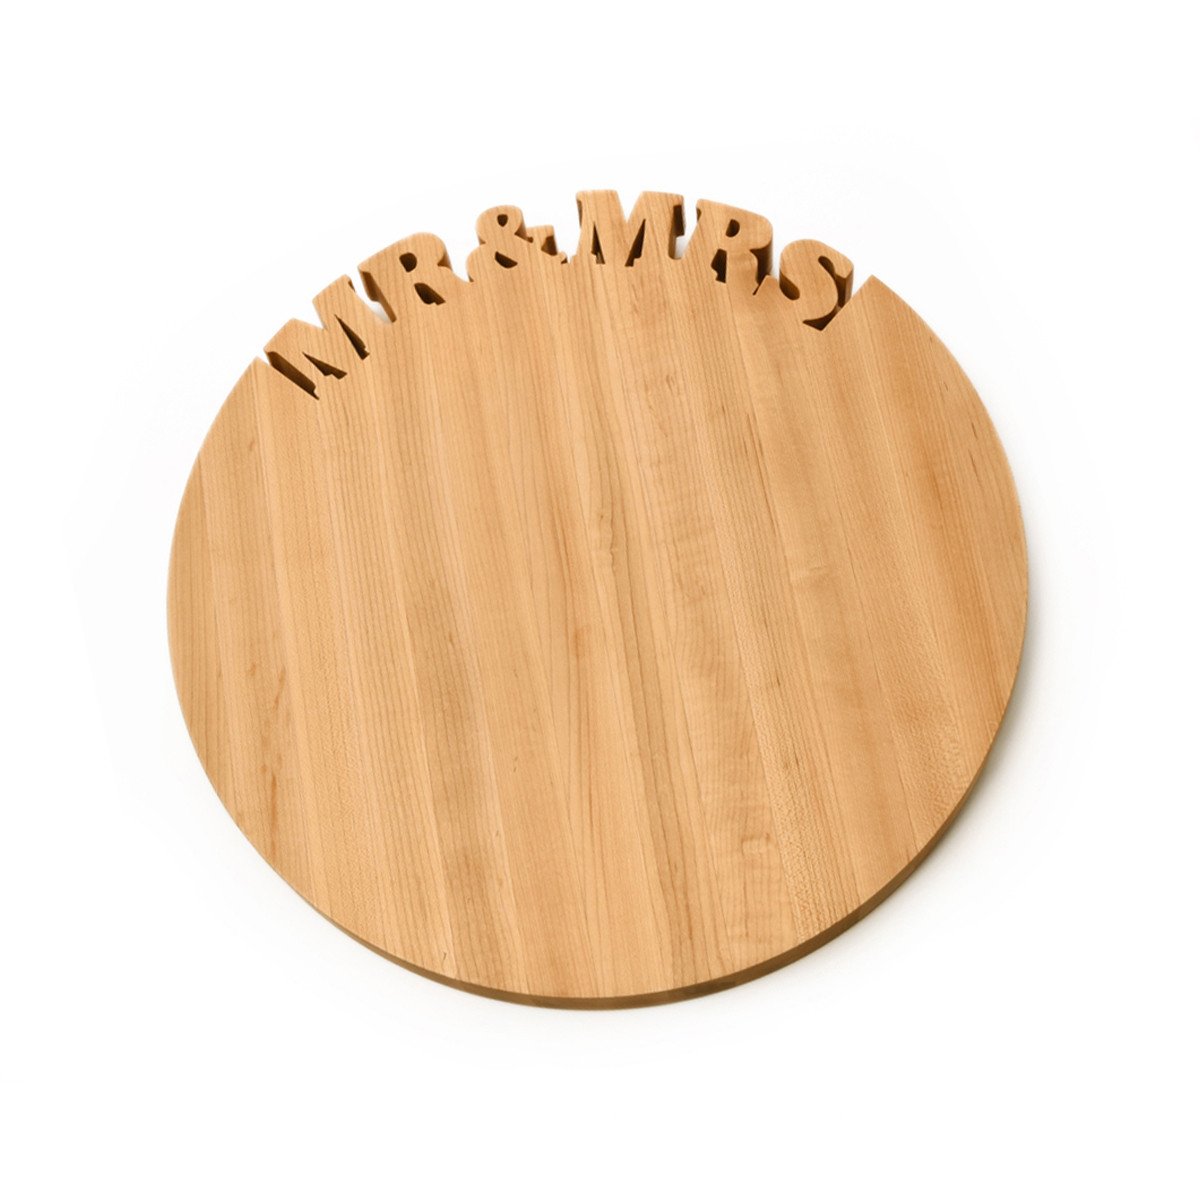 Unique Wedding Gift for the happy couple- marriage gifts - Words with Boards
 - 2